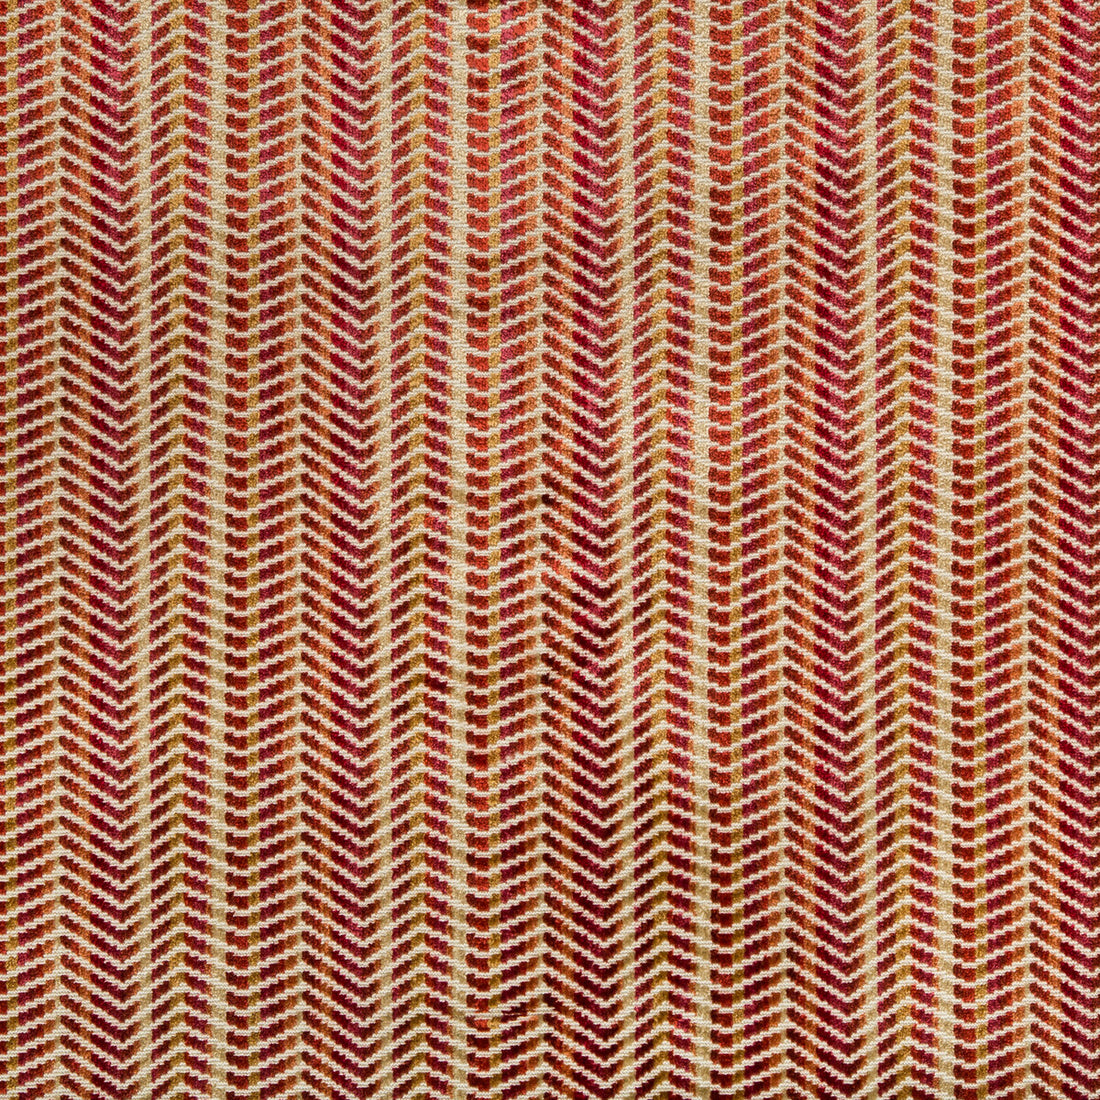 Alton Velvet fabric in flame color - pattern 2019124.194.0 - by Lee Jofa in the Harlington Velvets collection